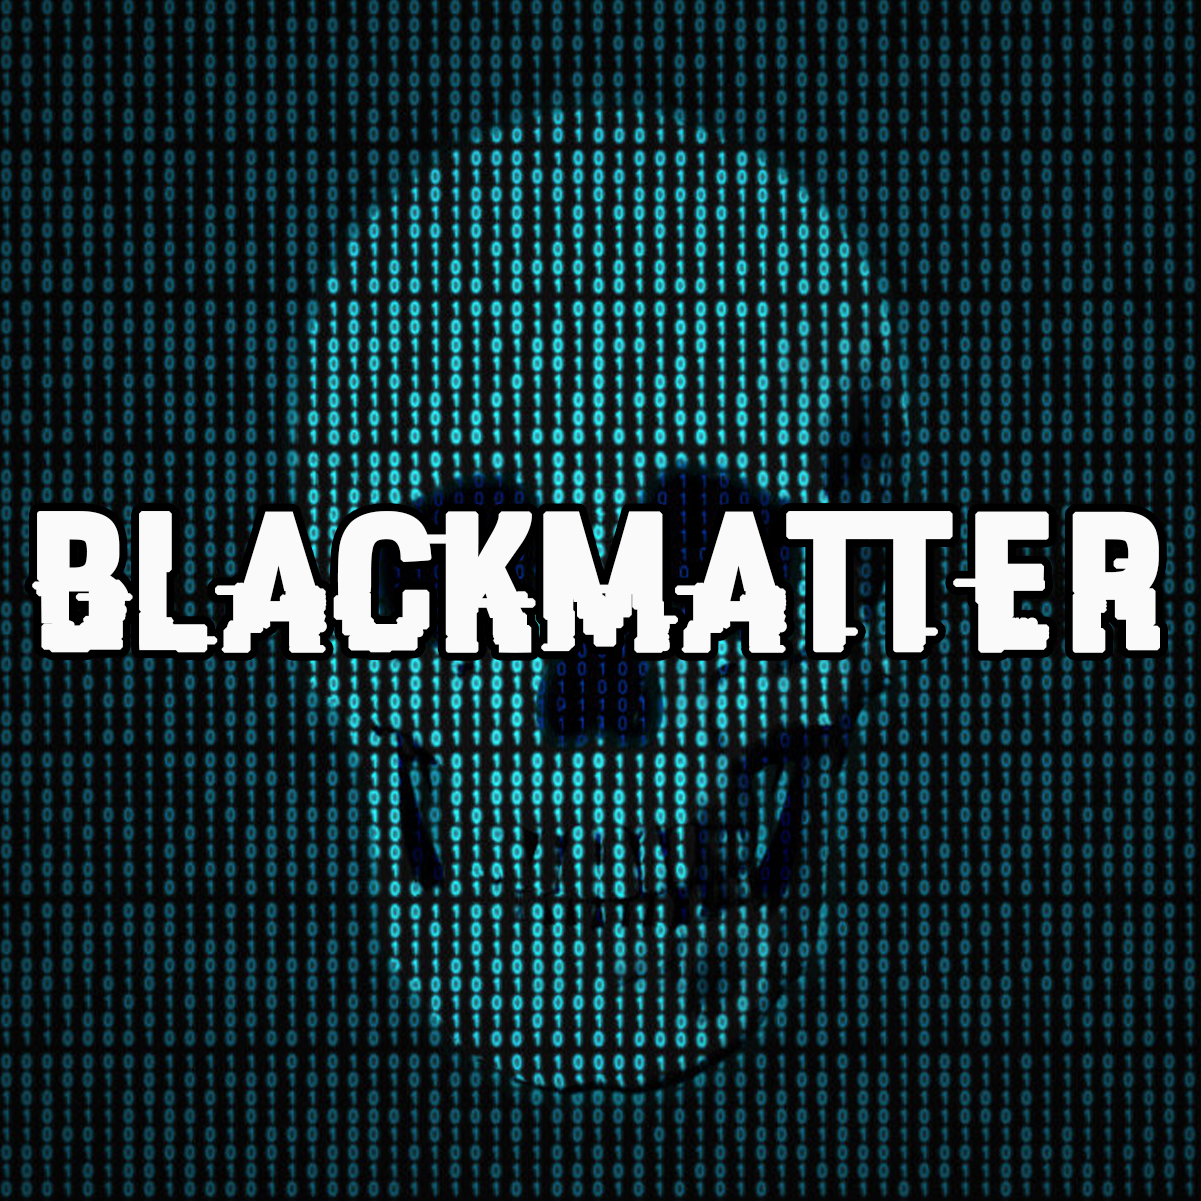 BlackMatter Ransomware Gang Allegedly Shutting Down Operations Due to Enforcement Pressure